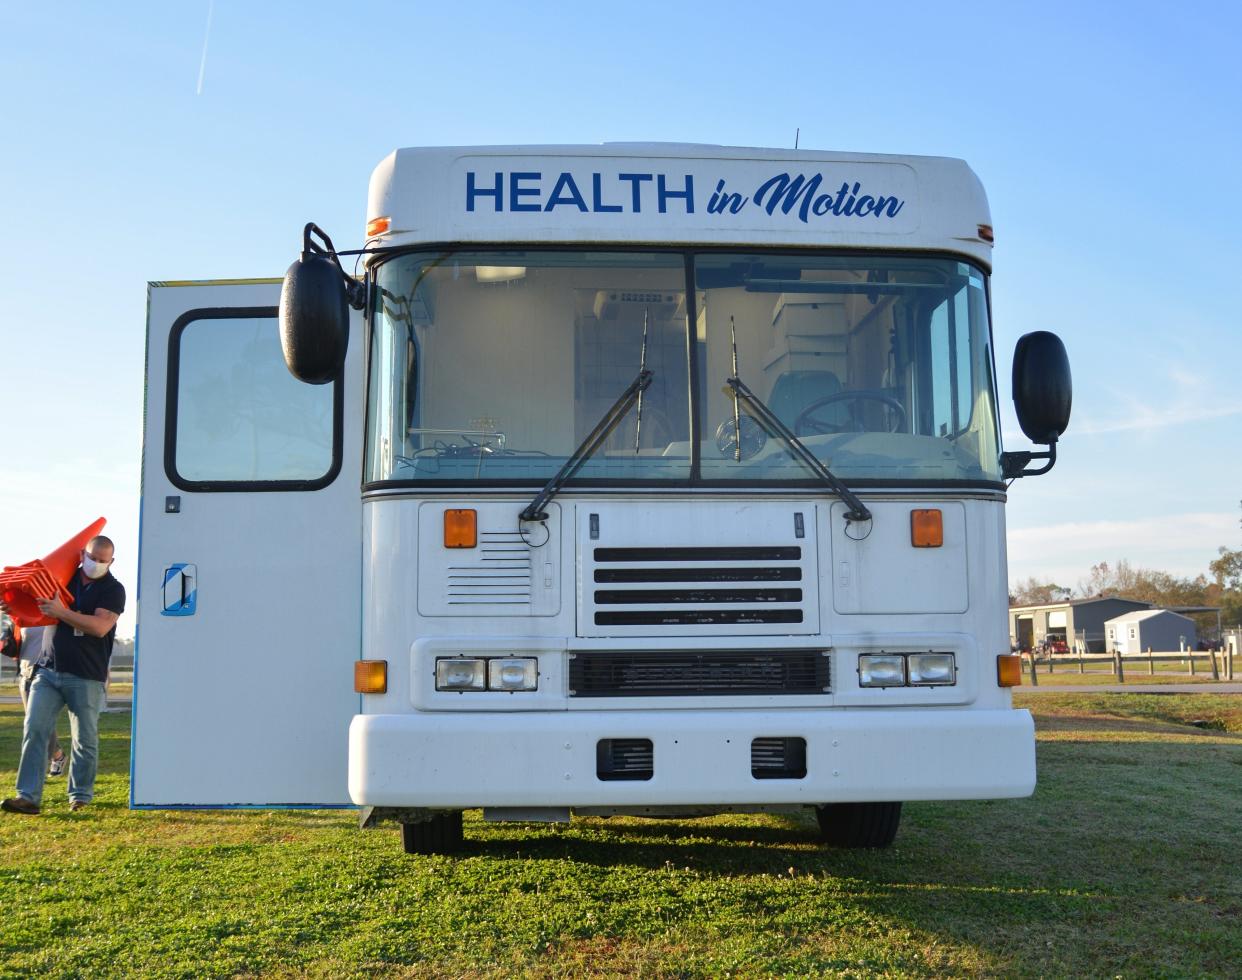 The Mobile Medical Unit recently received a new A1C machine to help screen for diabetes. The machine can be used to diagnose diabetes, prediabetes and measure blood sugar levels.